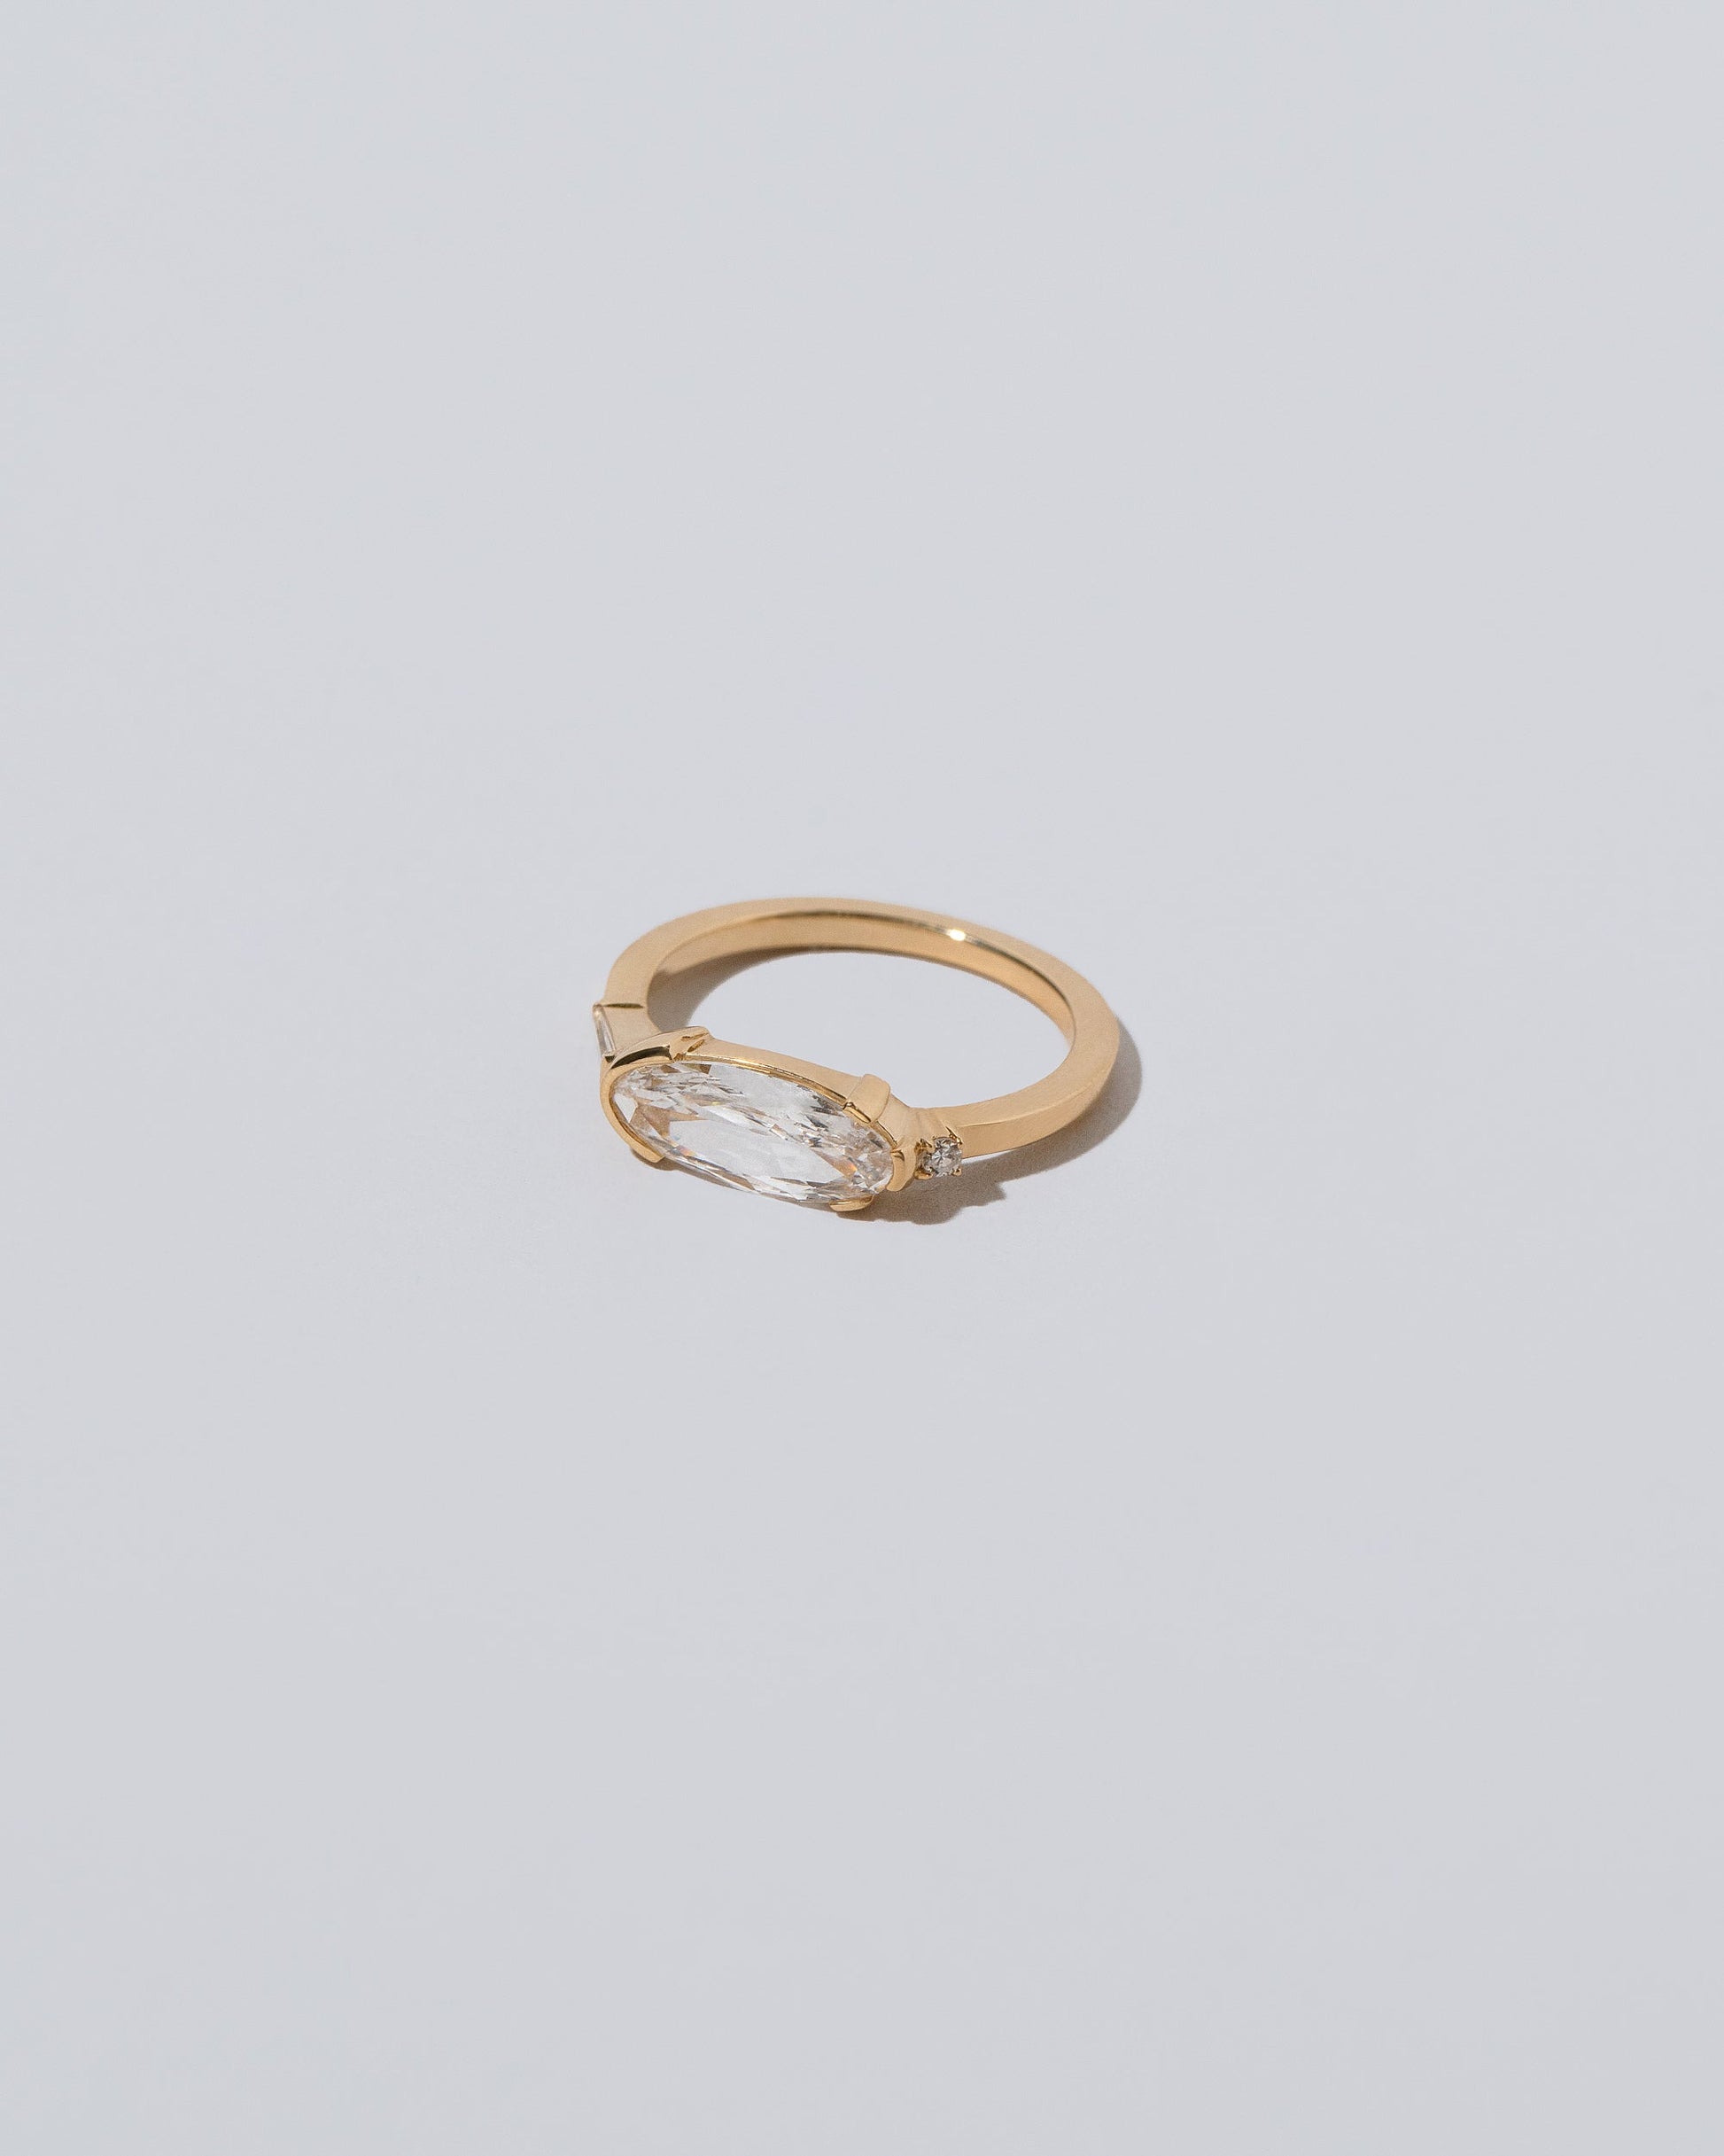 Product photo of the Slowdive Ring on a light color background